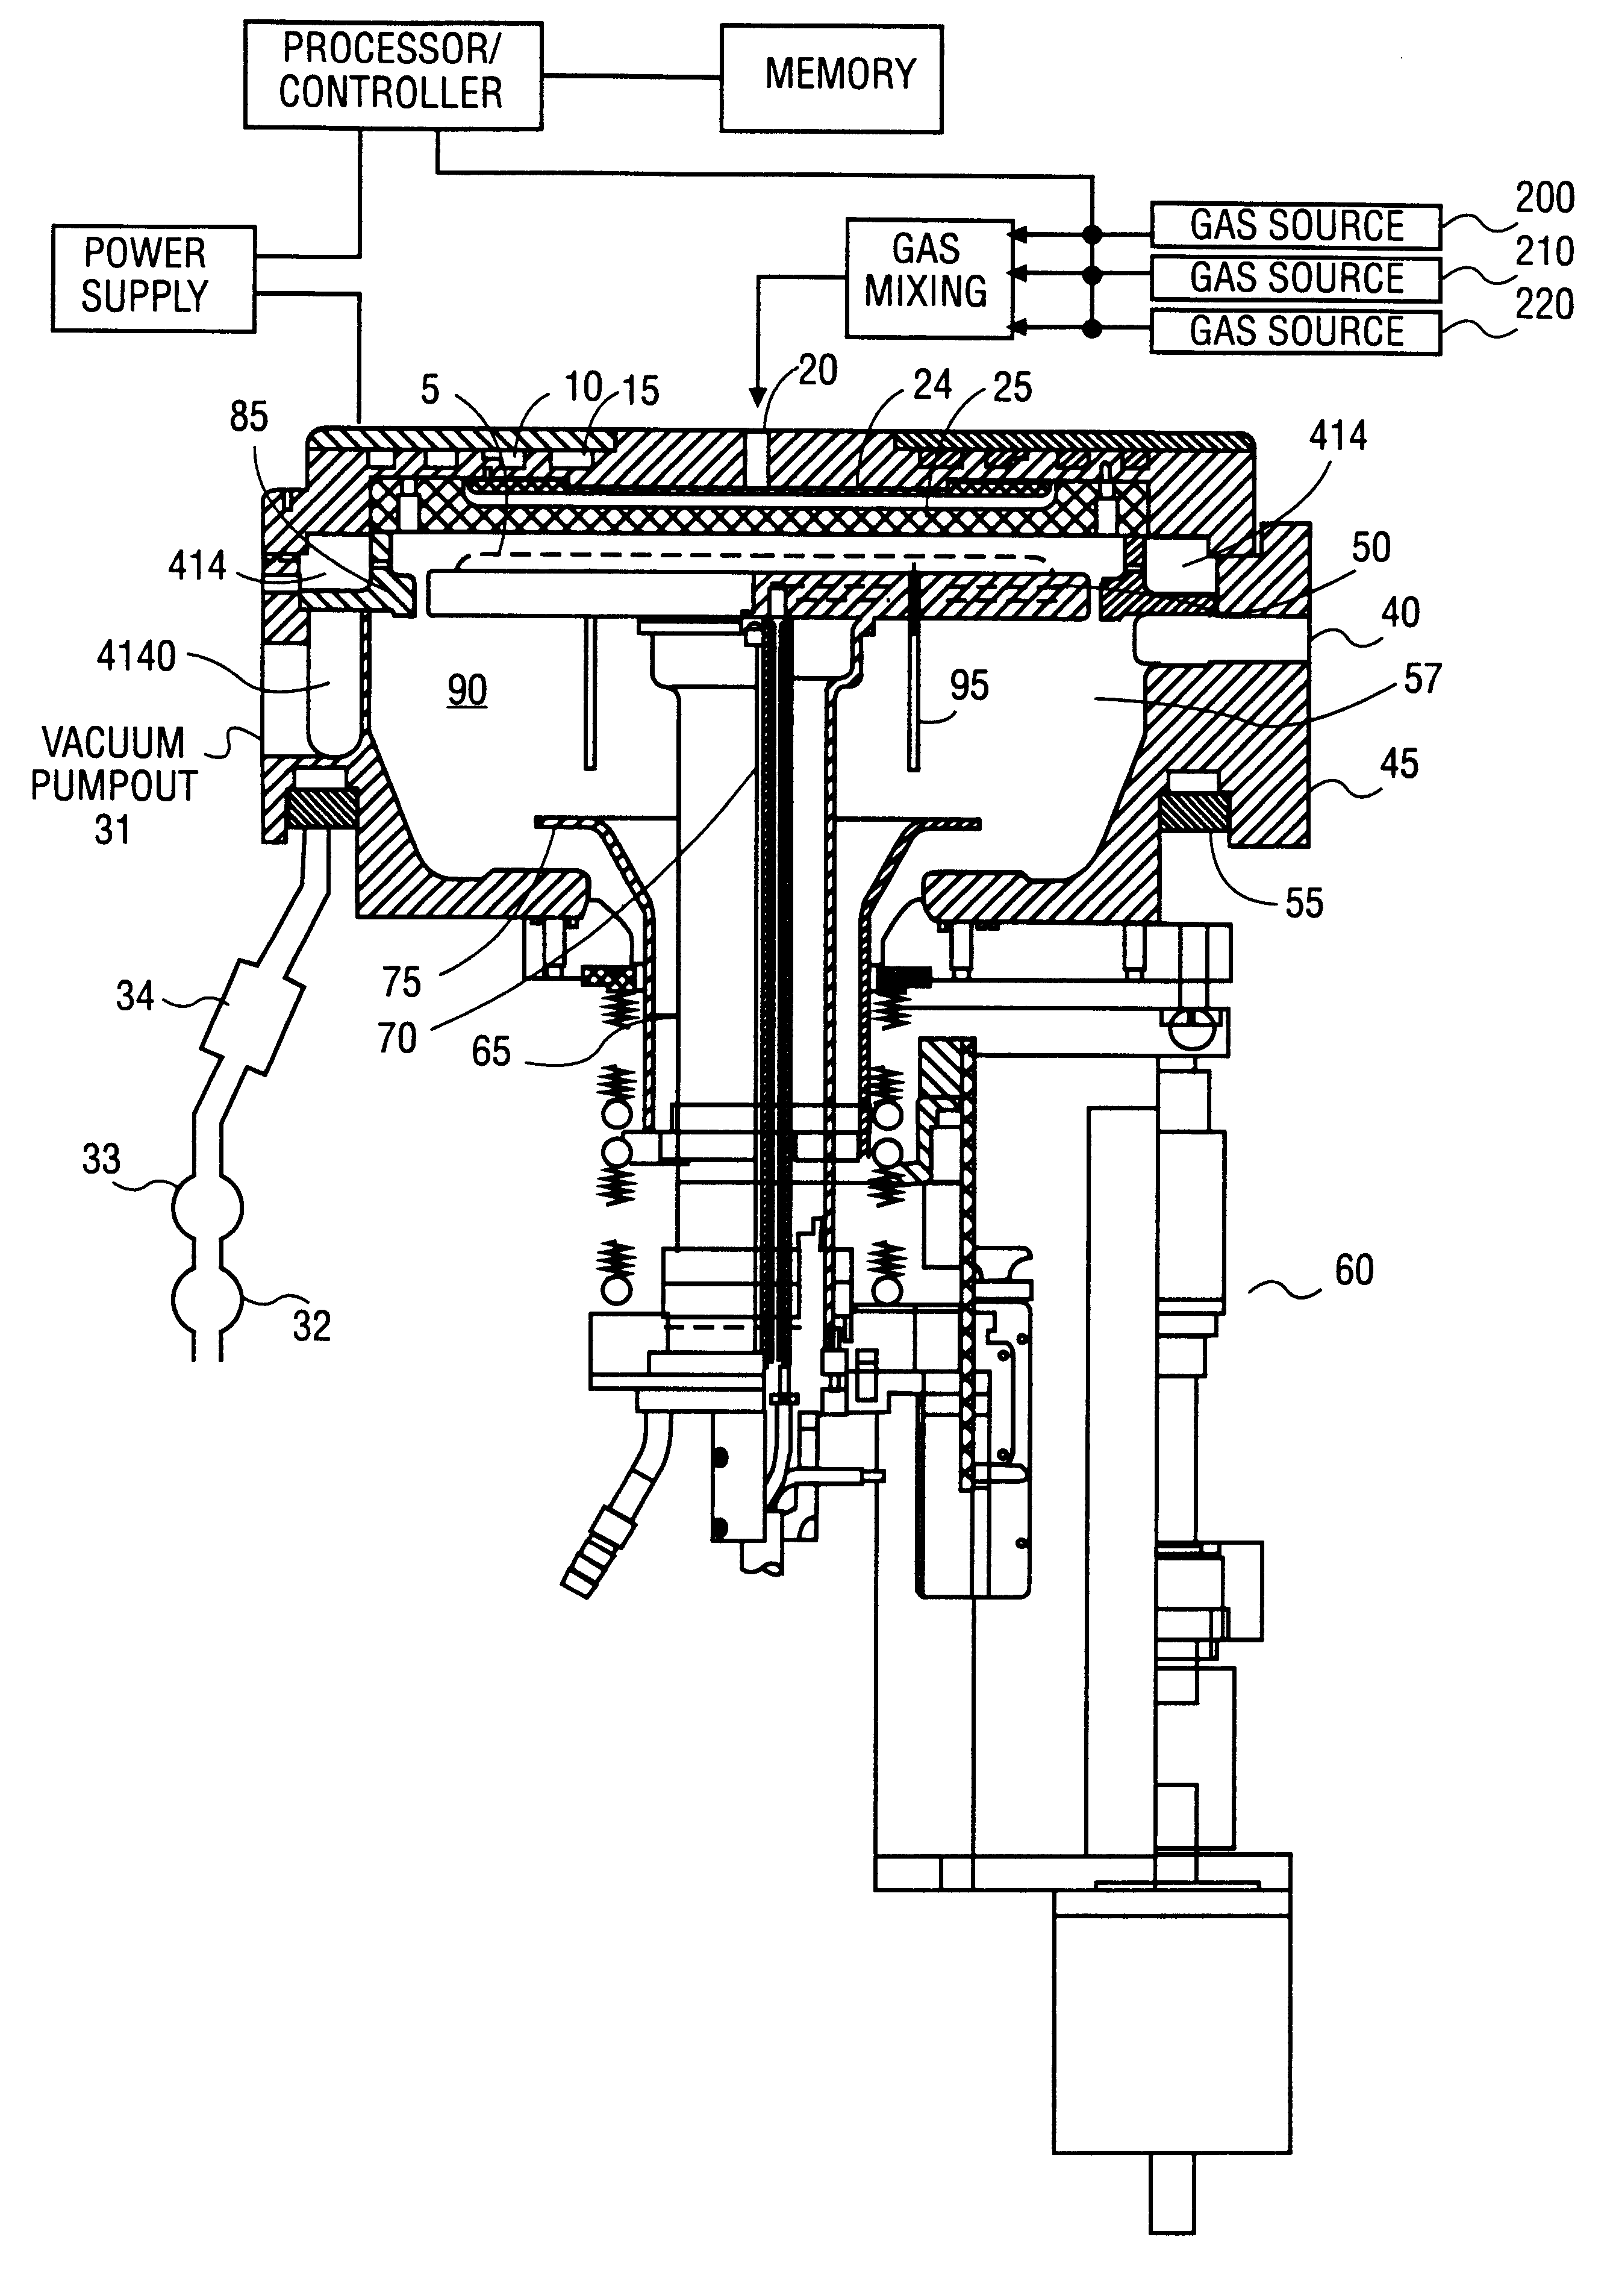 Method of forming a film in a chamber and positioning a substitute in a chamber